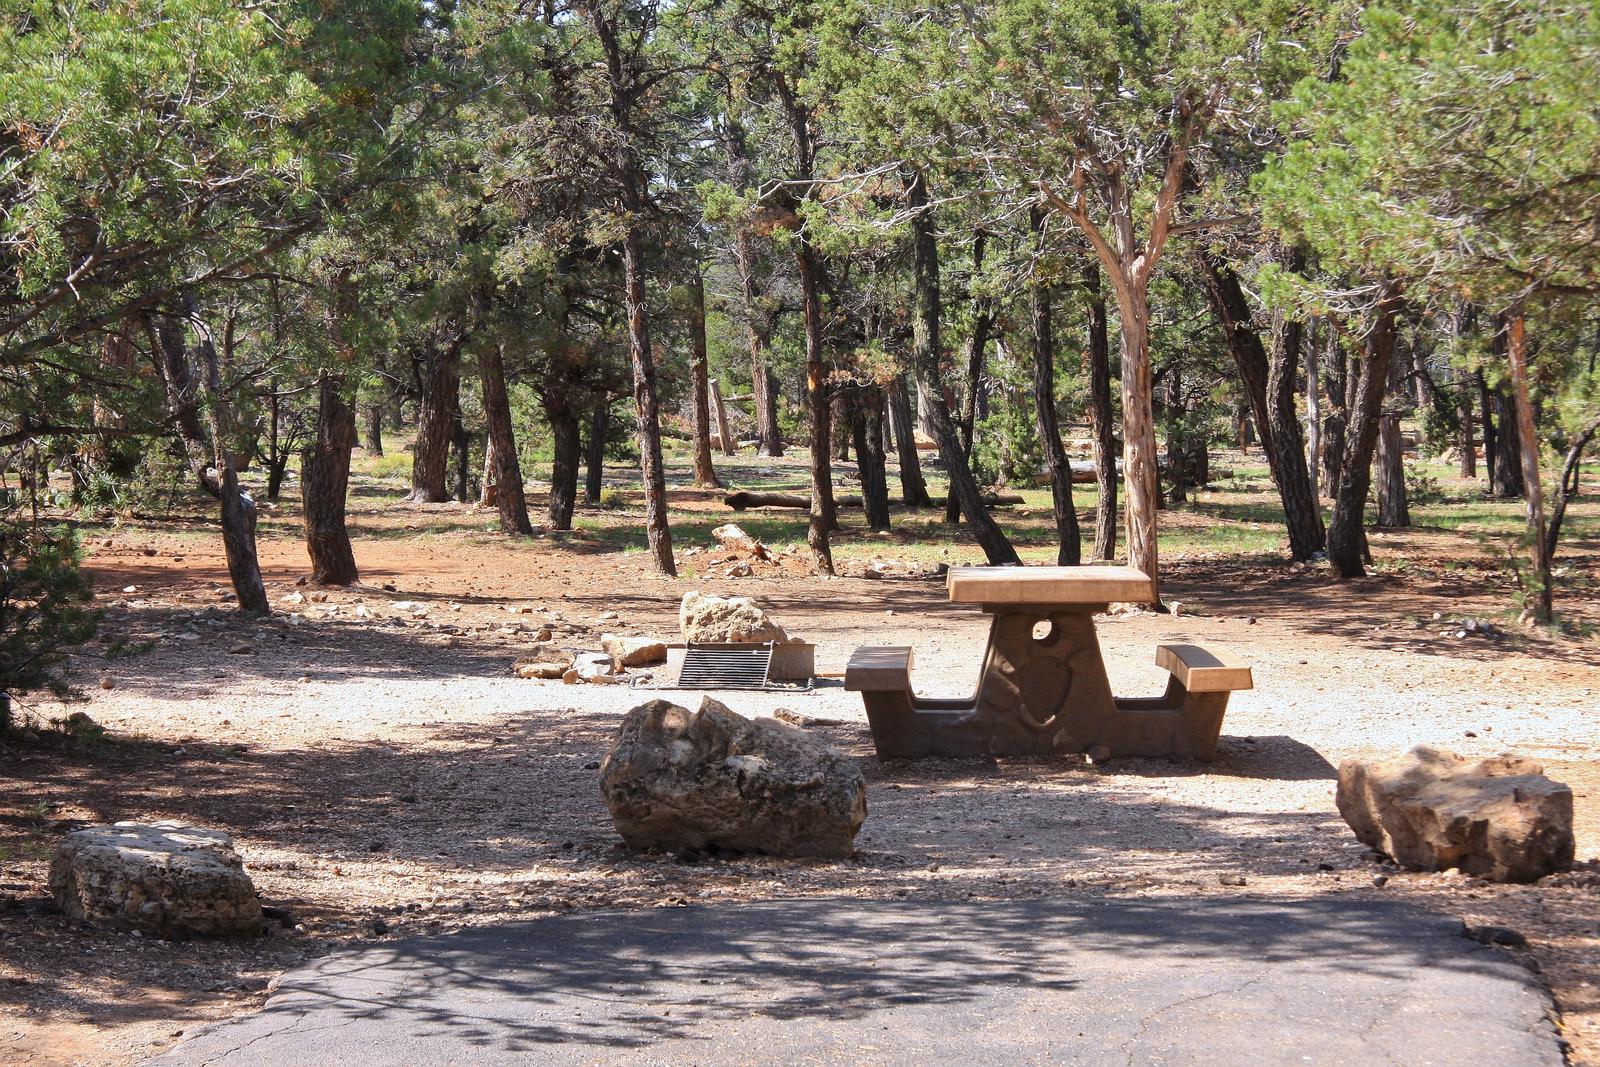 Picnic table, fire pit, and parking spot, Mather CampgroundPicnic table, fire pit, and parking spot for Maple Loop 190, Mather Campground